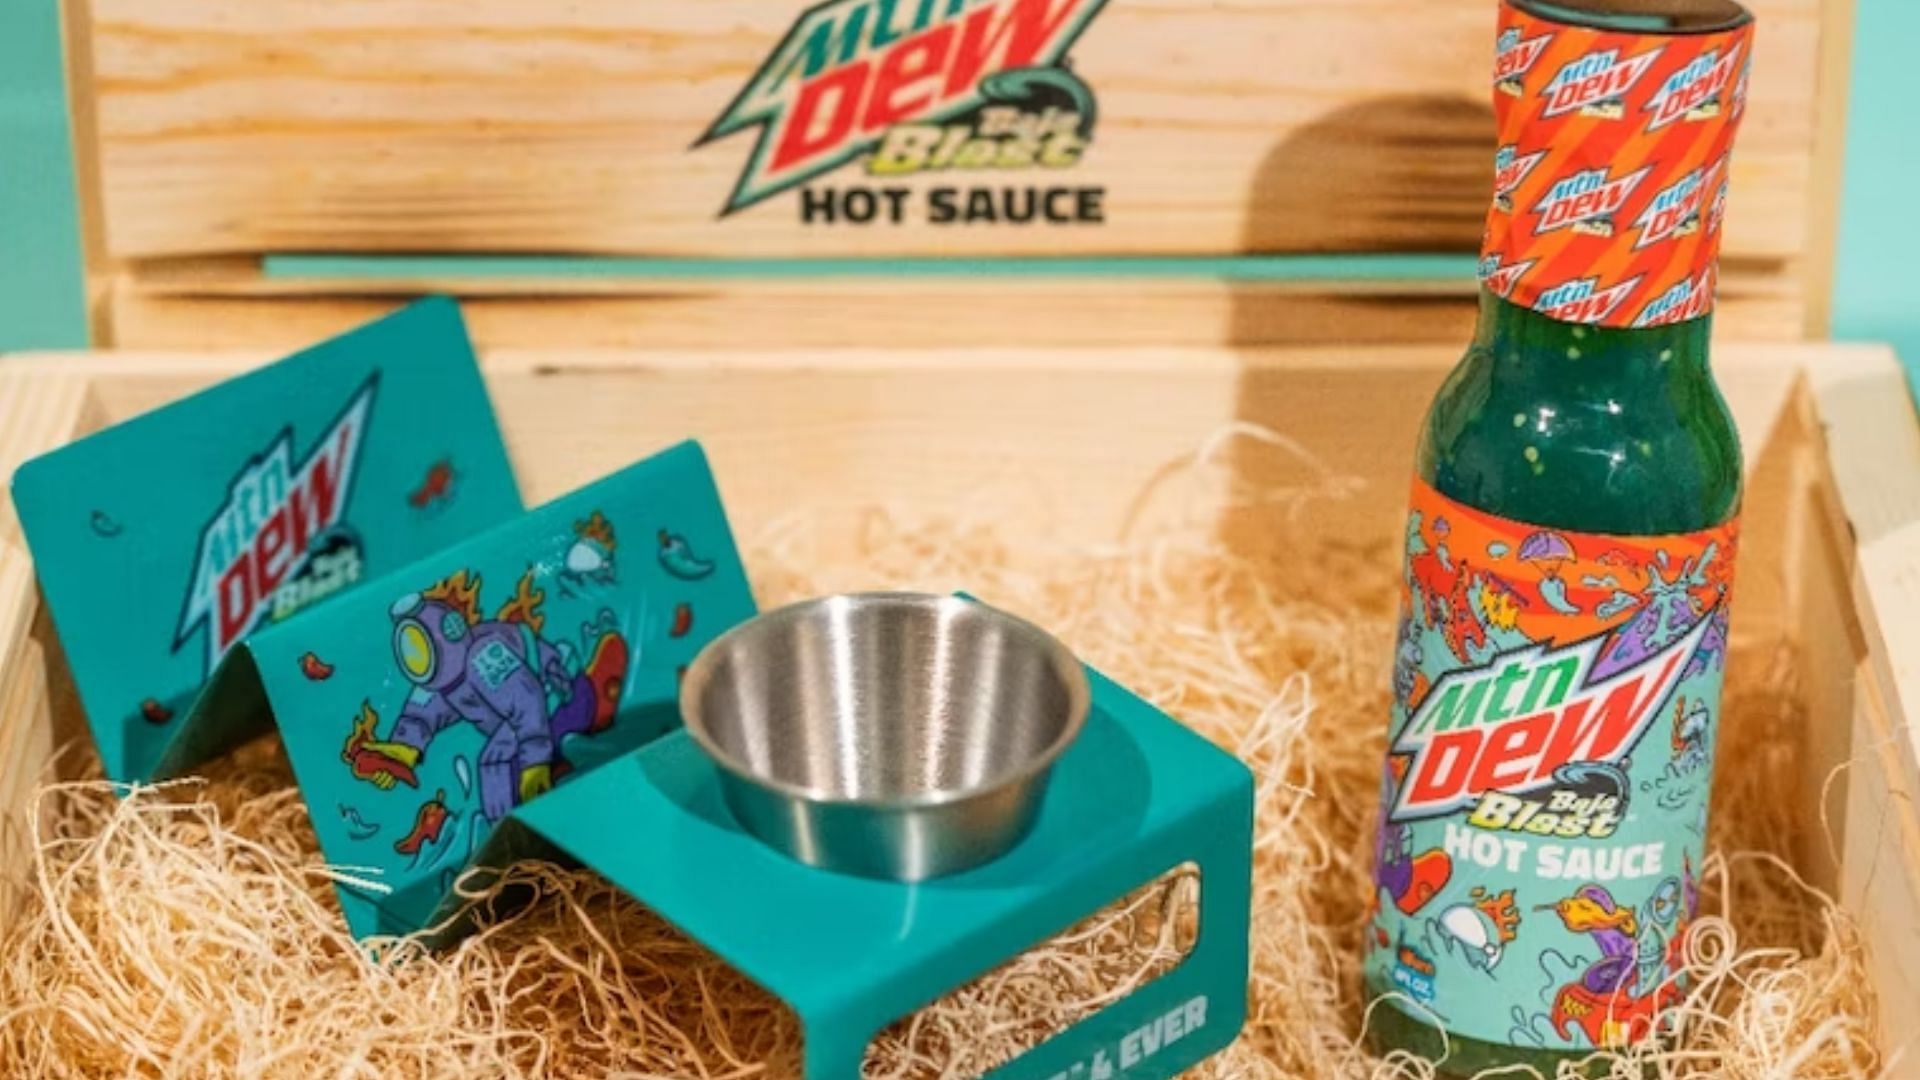 Enter the sweepstakes at the earliest to try your luck on getting the new Mountain Dew Baja Blast Hot sauce (Image via Mountain Dew)